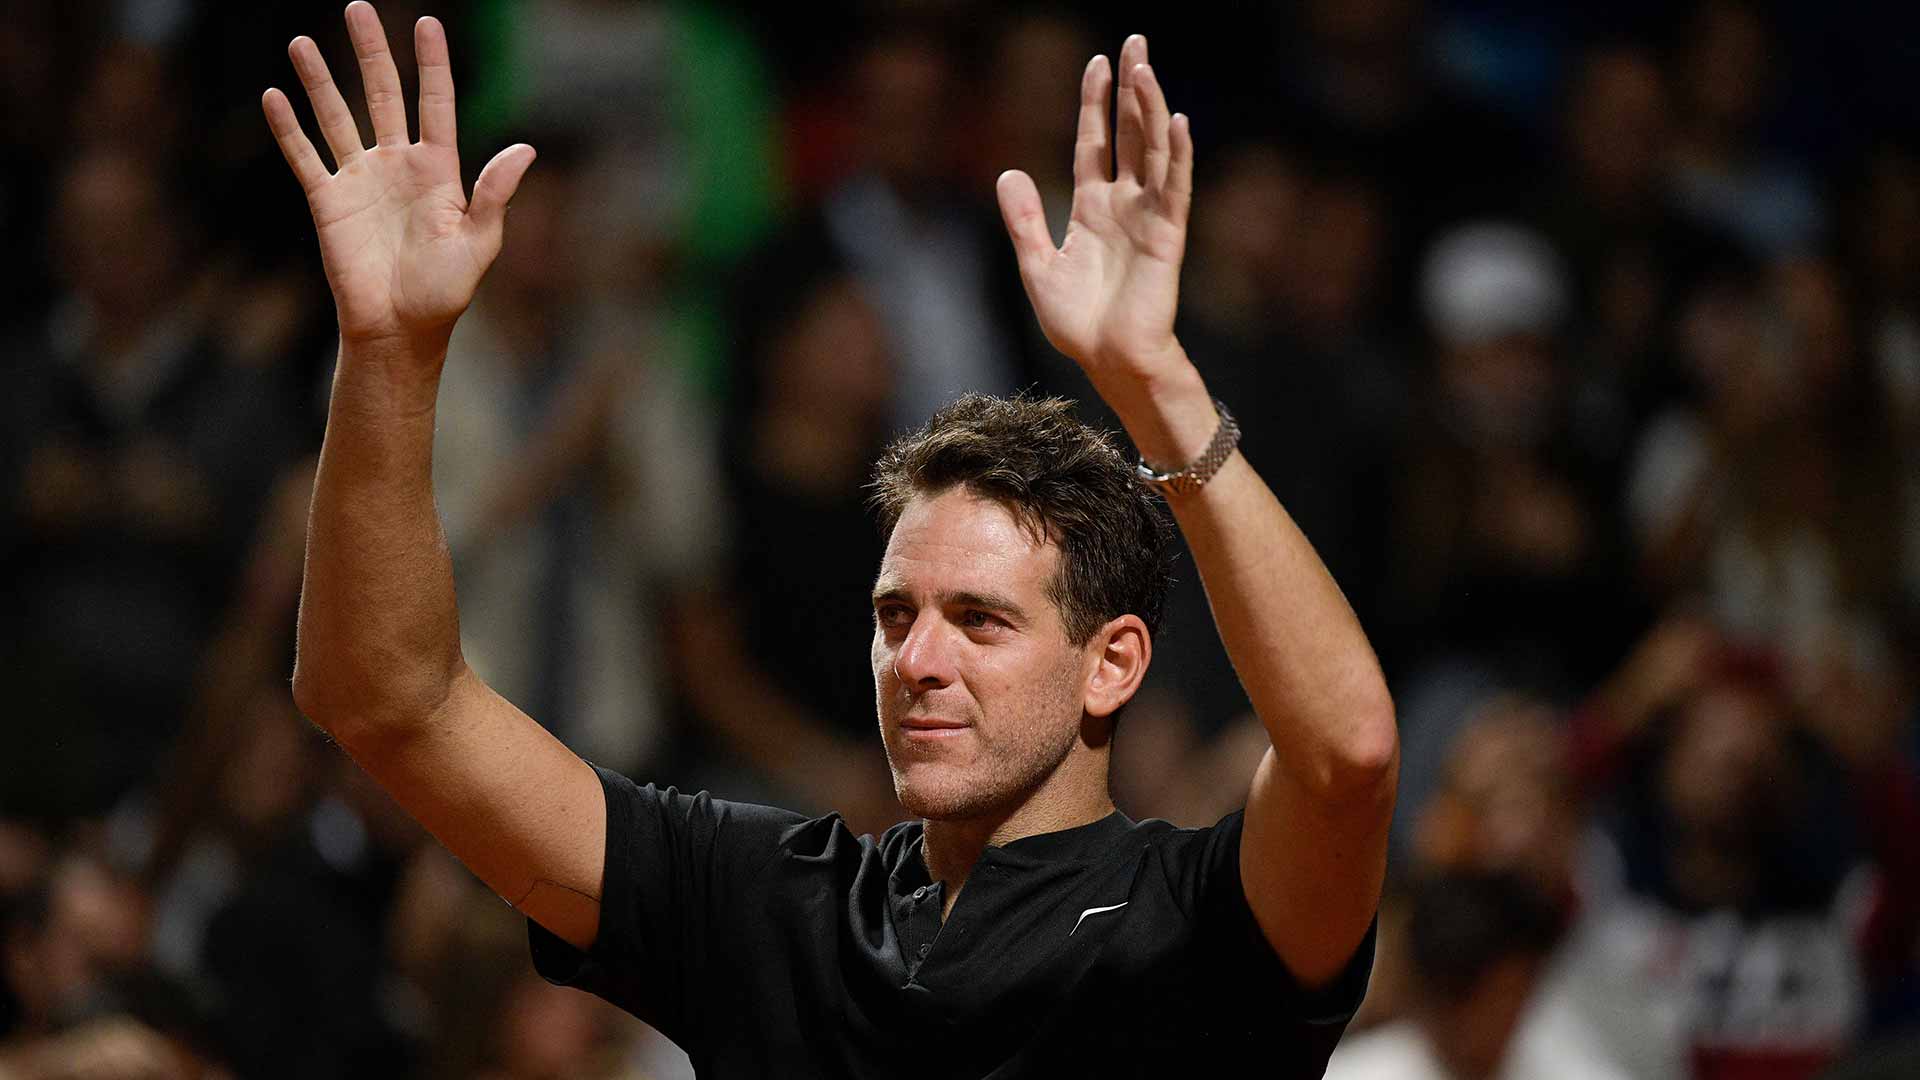 Juan Martin del Potro thanks Argentine fans for their passionate support.